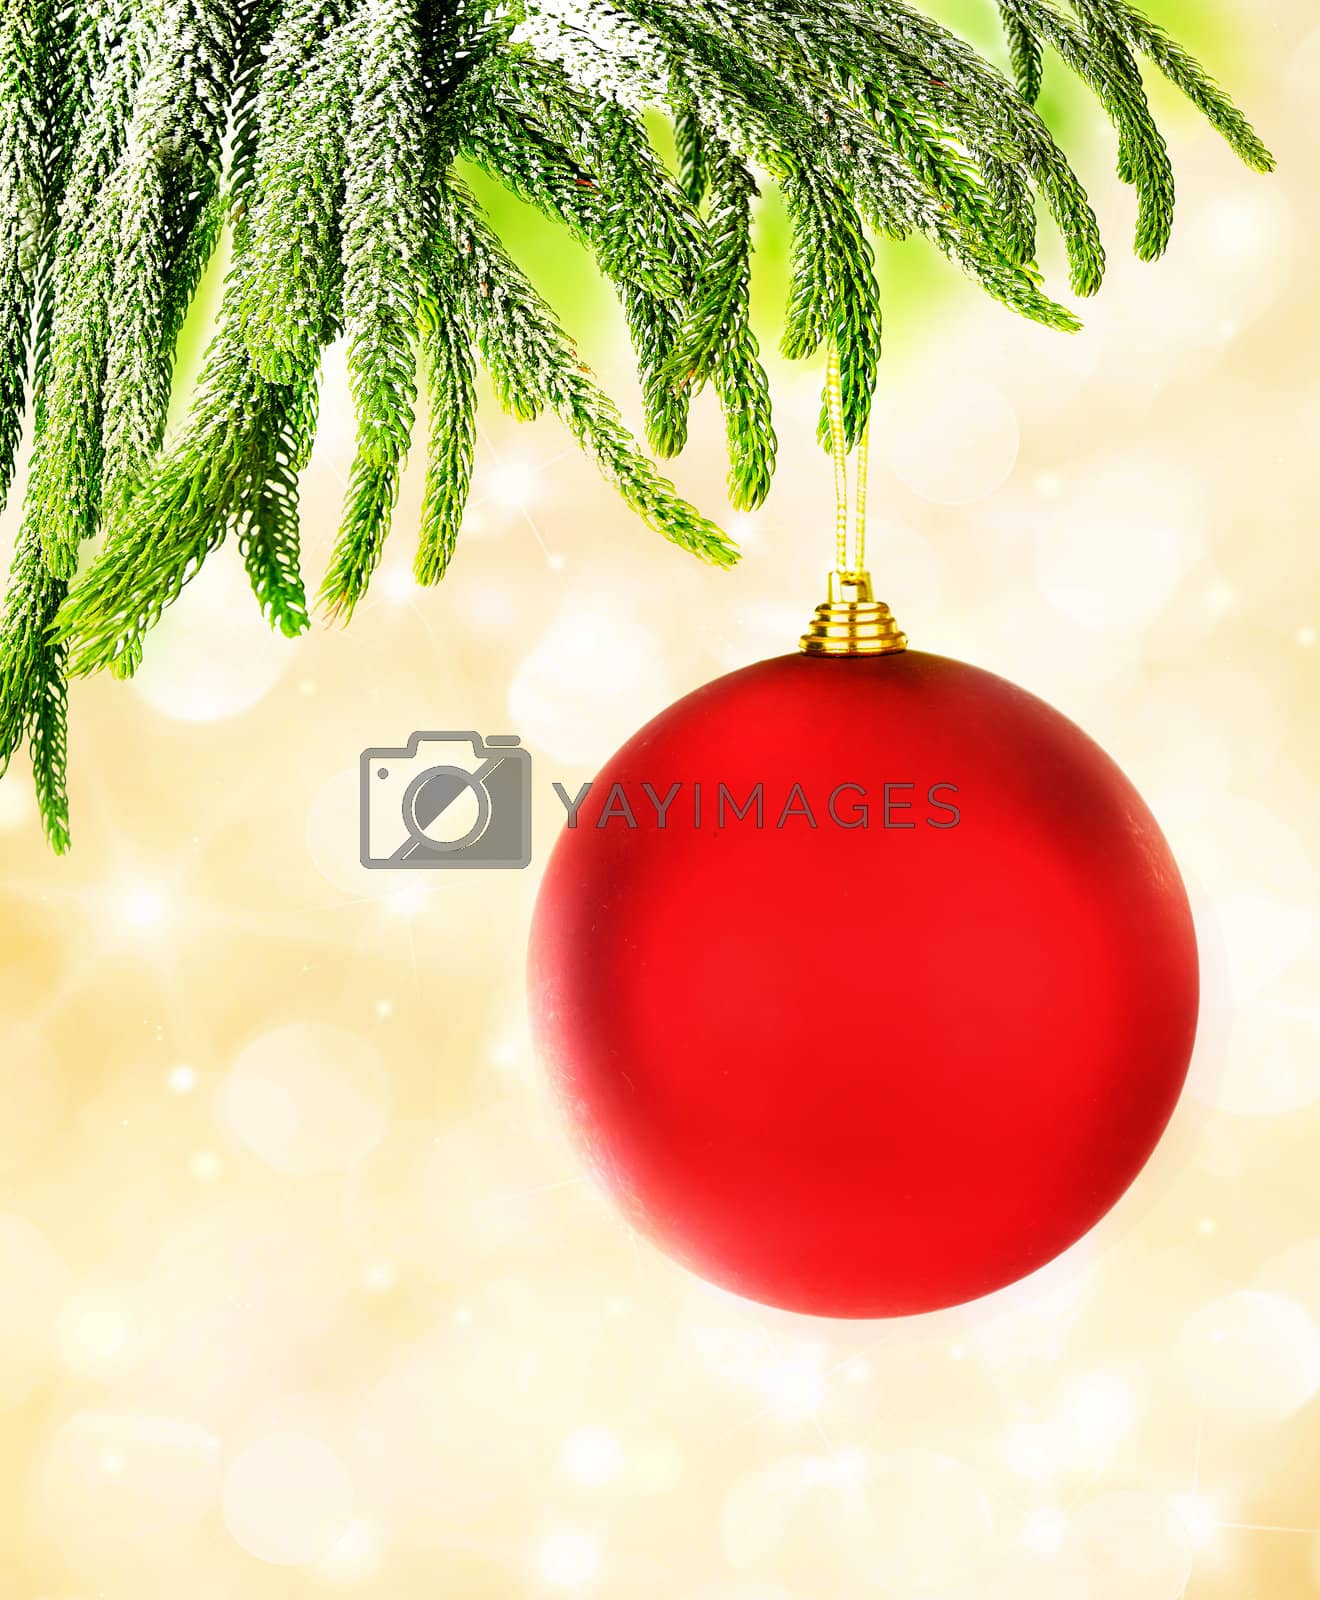 Royalty free image of Red Christmas bubble by Anna_Omelchenko